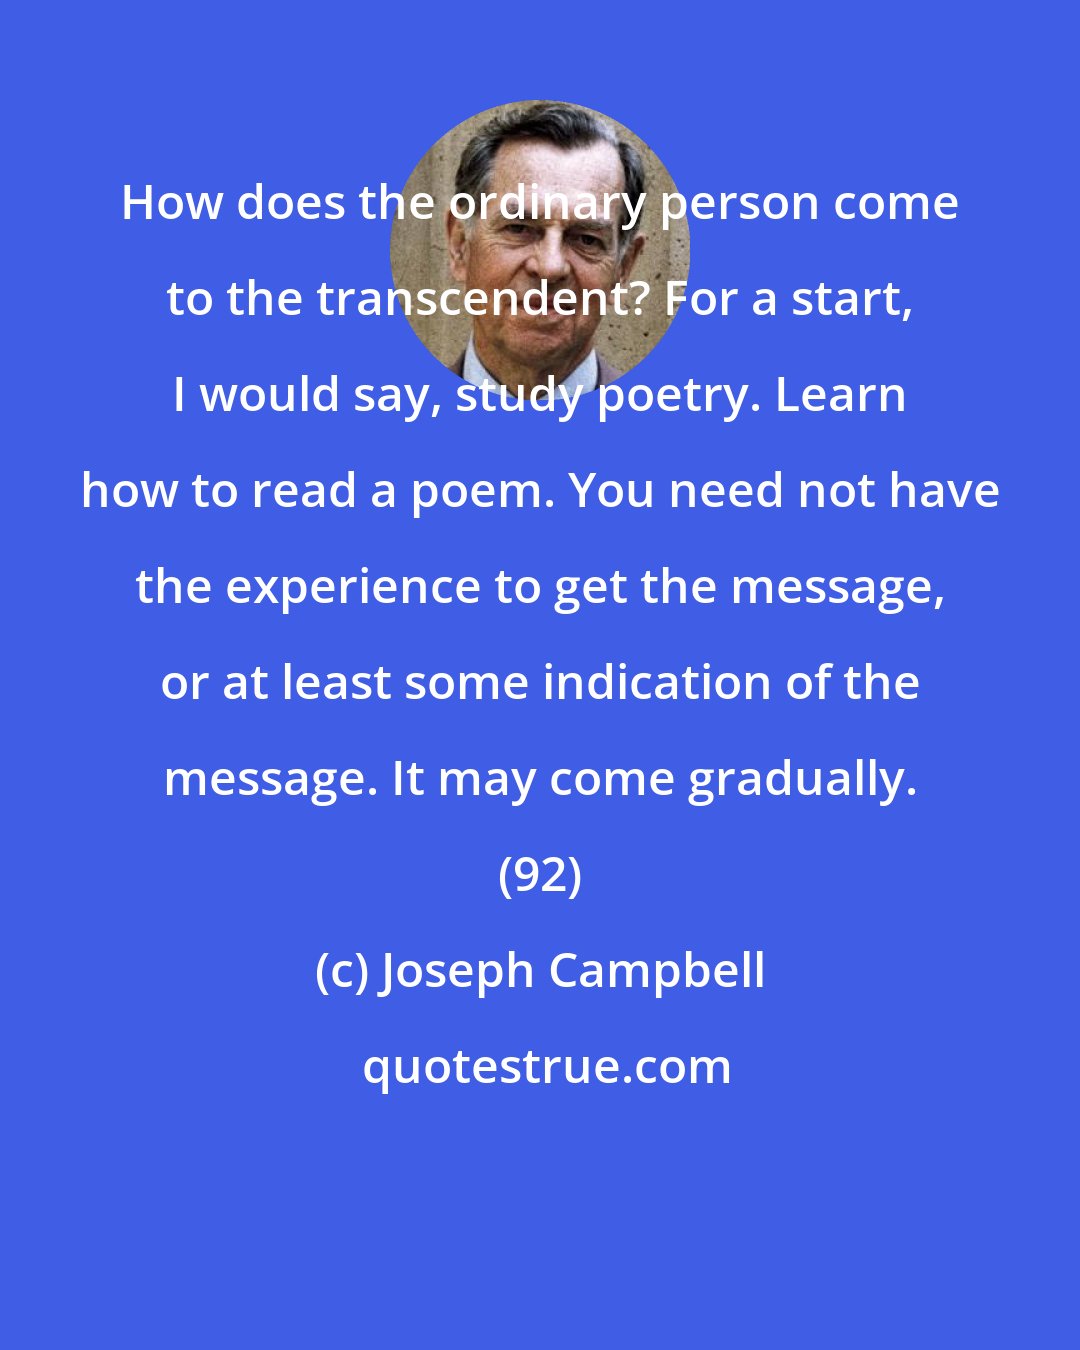 Joseph Campbell: How does the ordinary person come to the transcendent? For a start, I would say, study poetry. Learn how to read a poem. You need not have the experience to get the message, or at least some indication of the message. It may come gradually. (92)